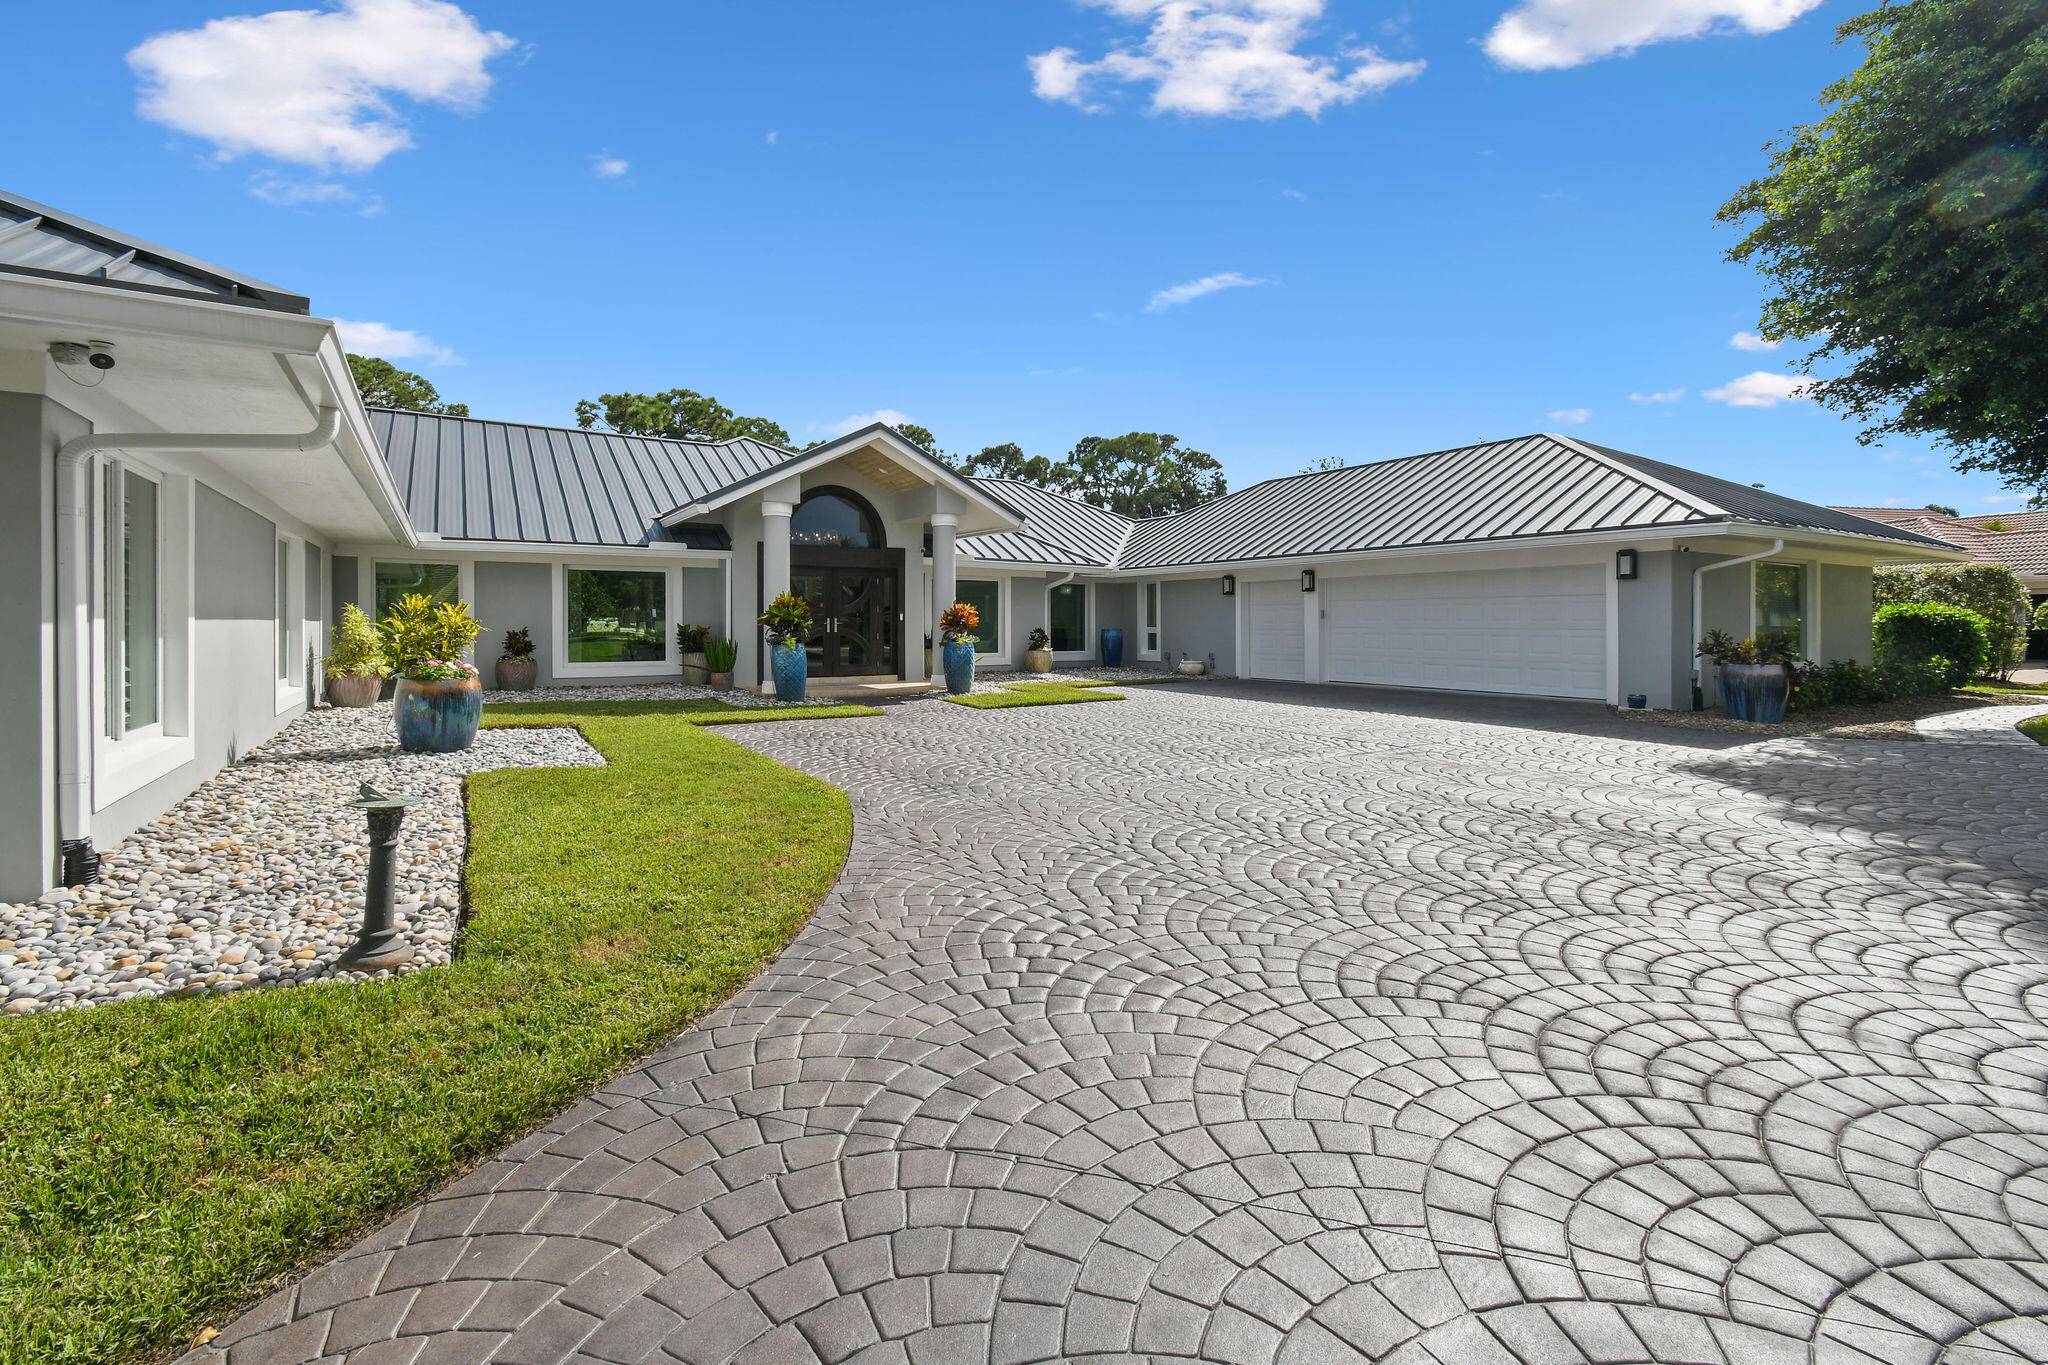 Experience luxury living at its finest in this fully reimagined CBS single story golf course home in the prestigious 'Harbour Village' neighborhood of Harbour Ridge Yacht Country Club.